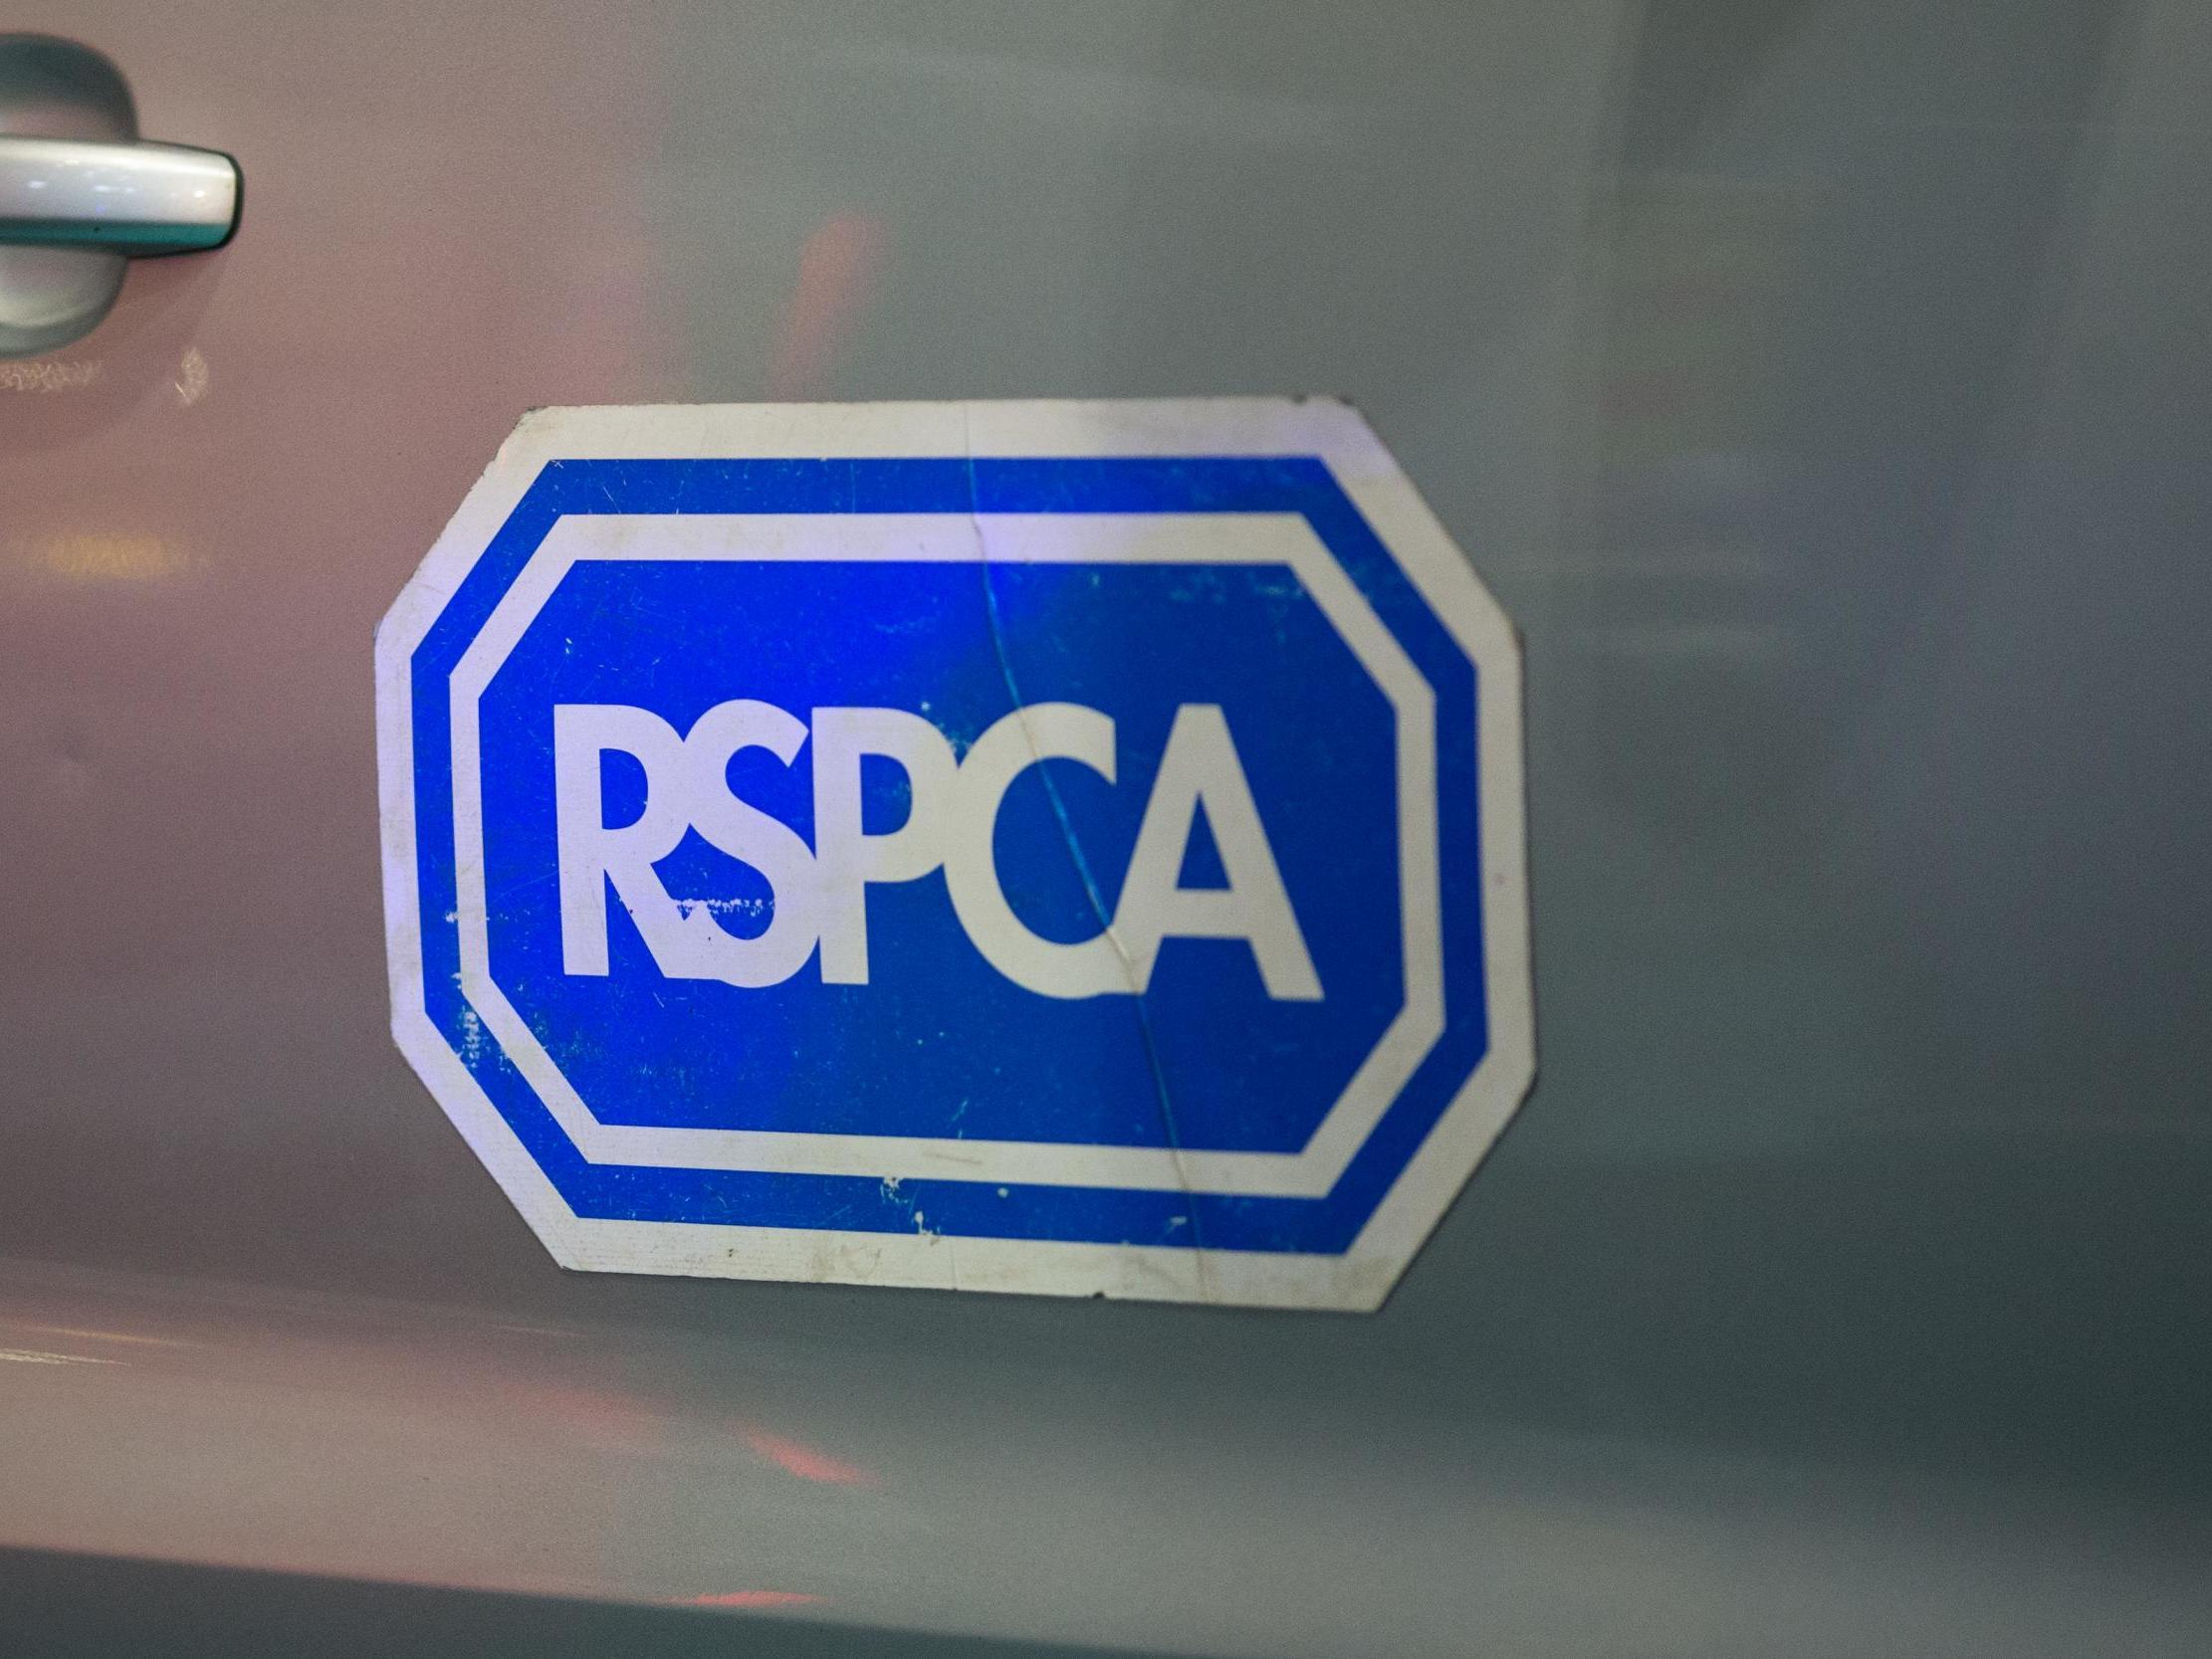 The RSPCA has appealed for information to help catch the person responsible for the dog's death.